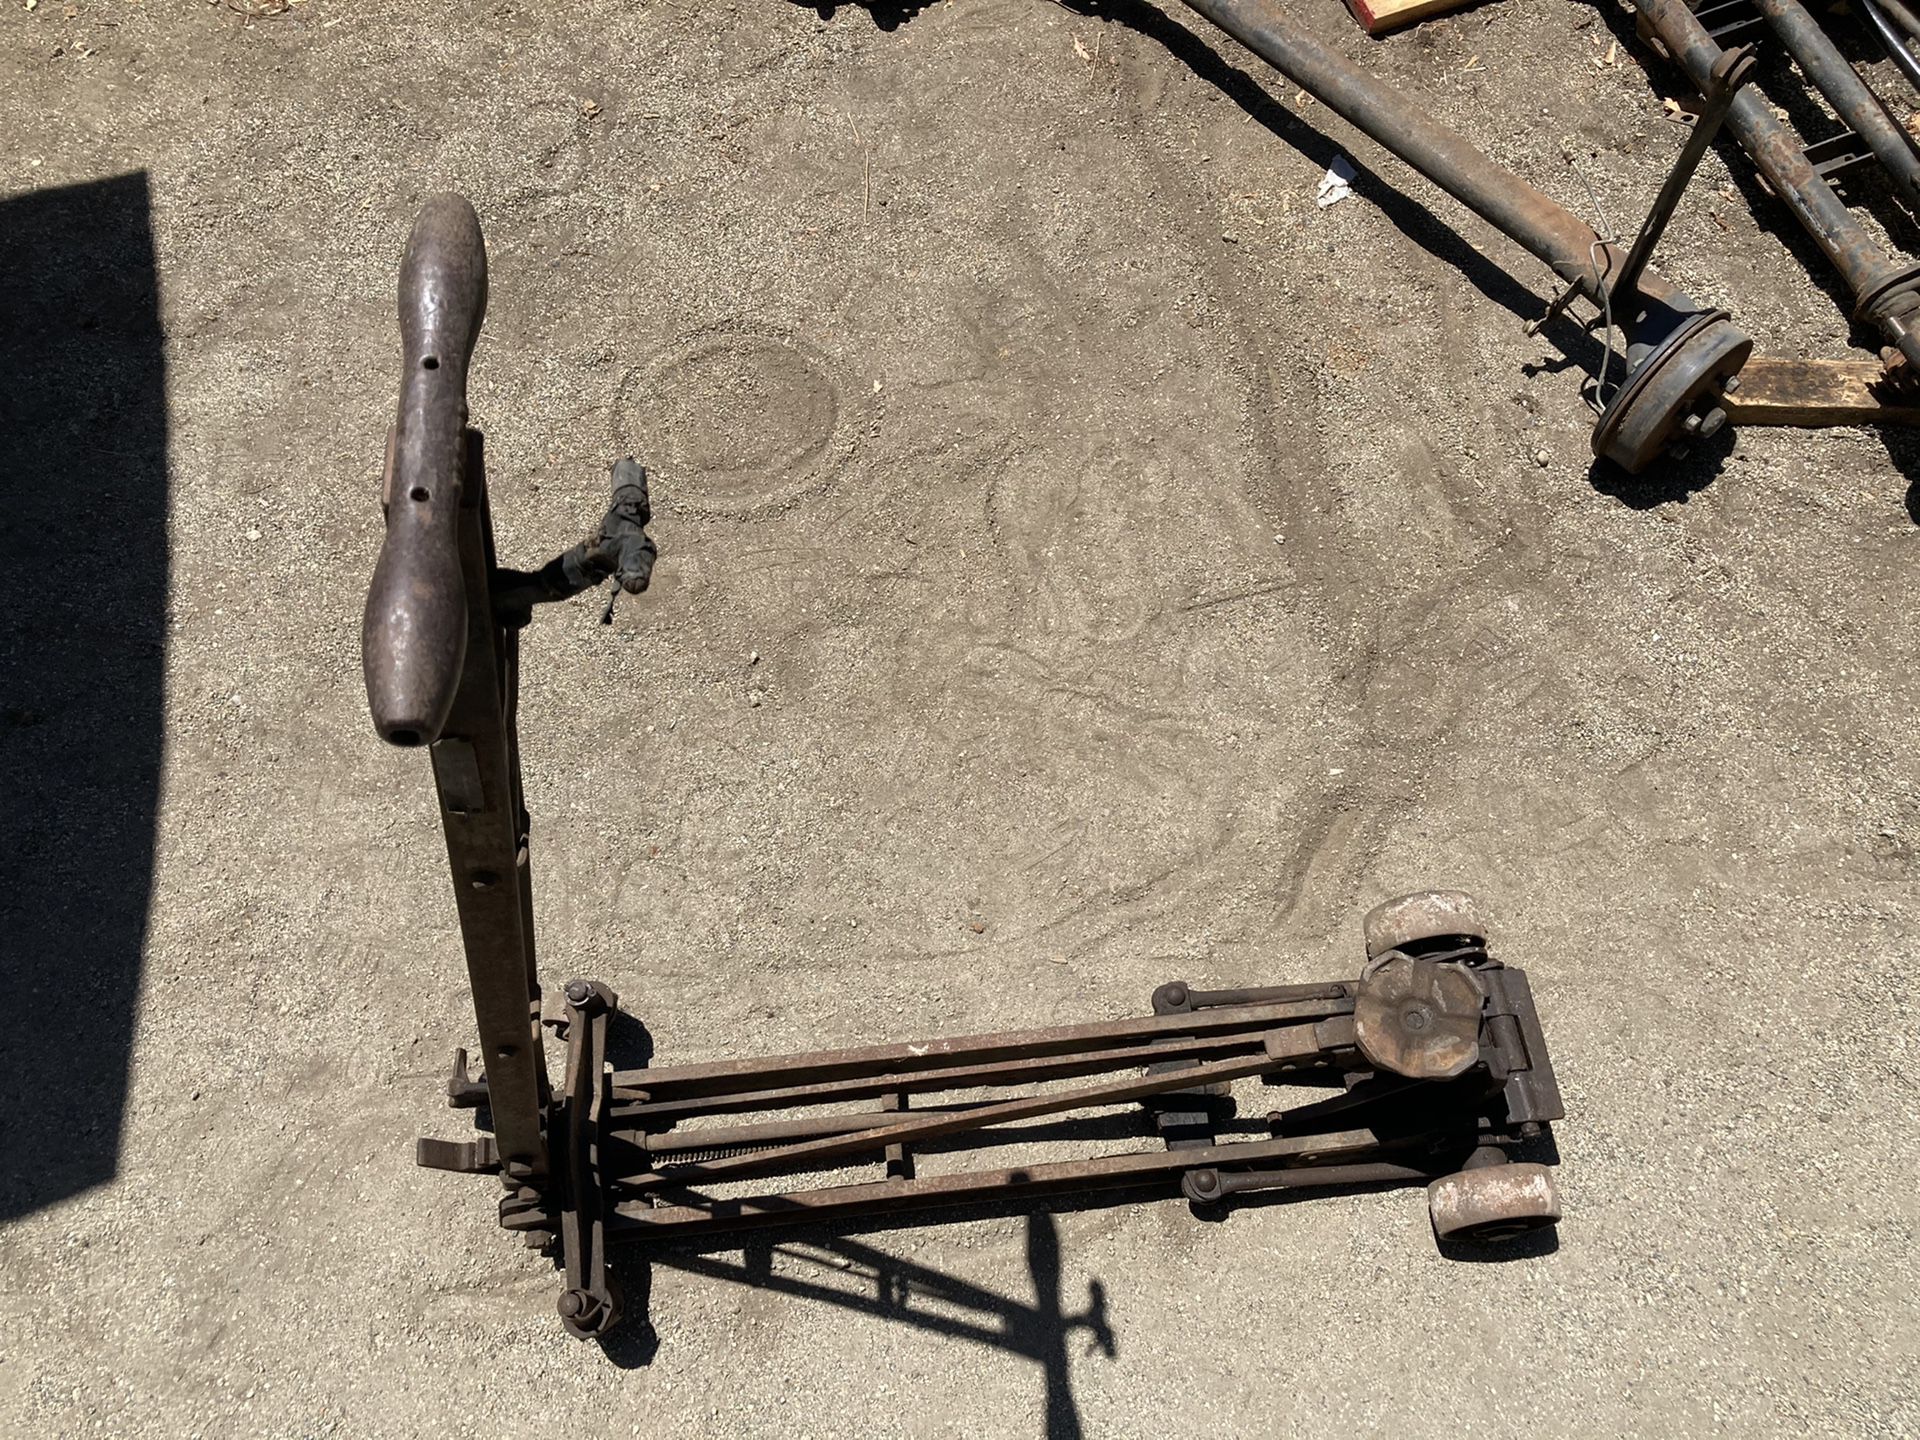 Antique car and truck jack.